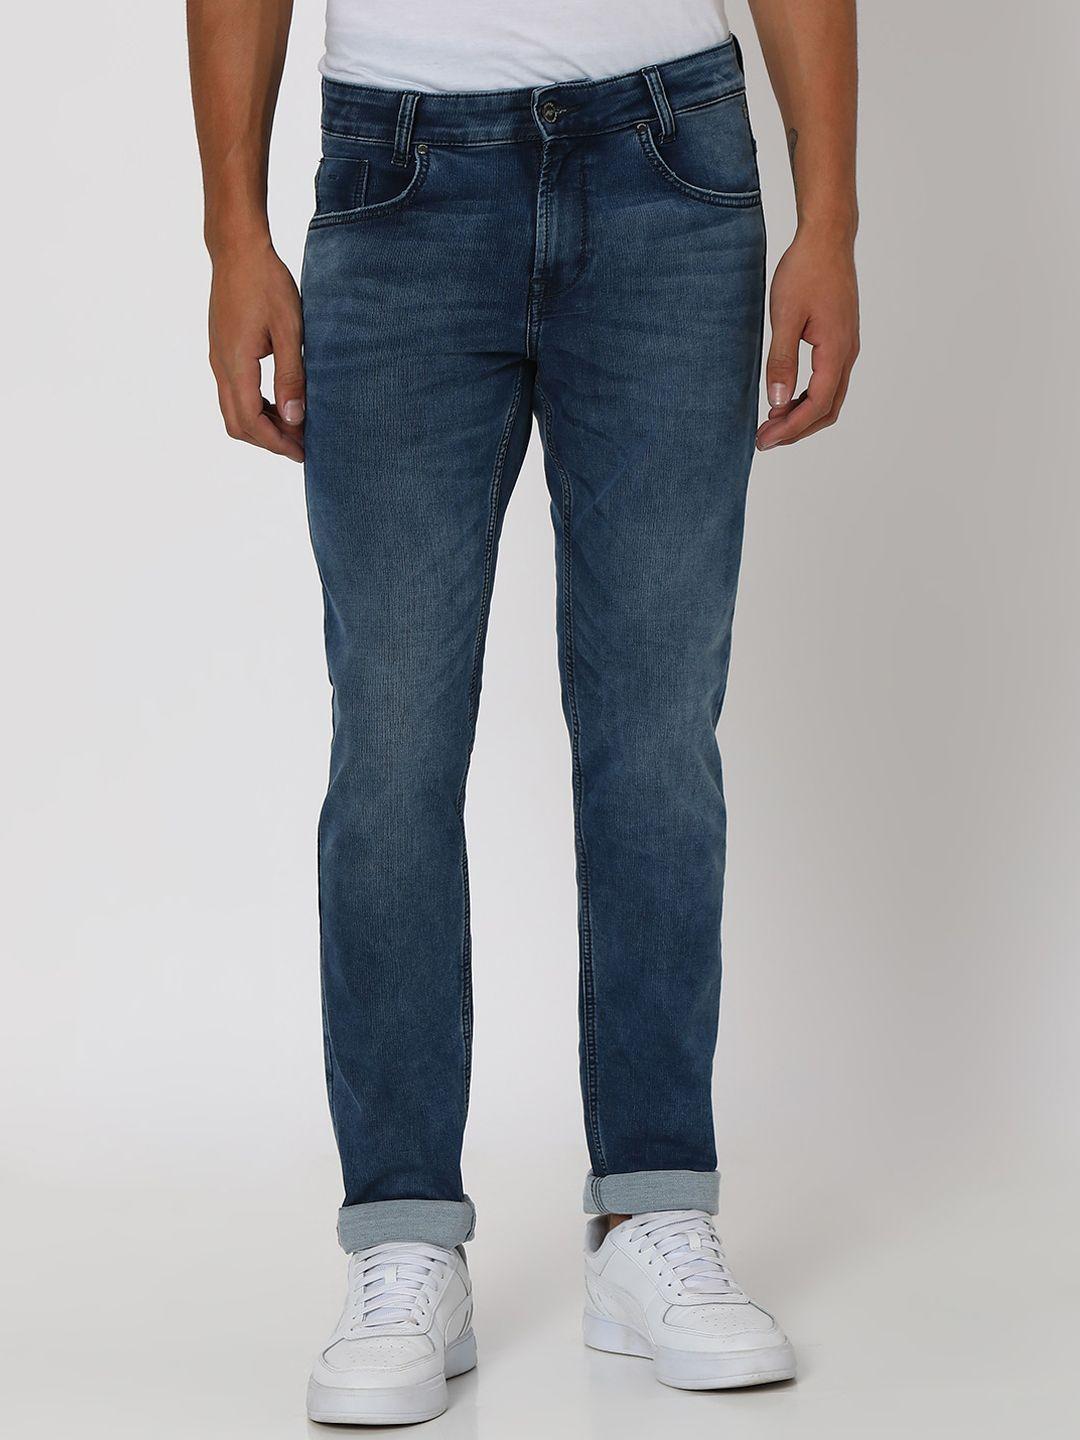 mufti-men-original-slim-fit-mid-rise-clean-look-stretchable-jeans